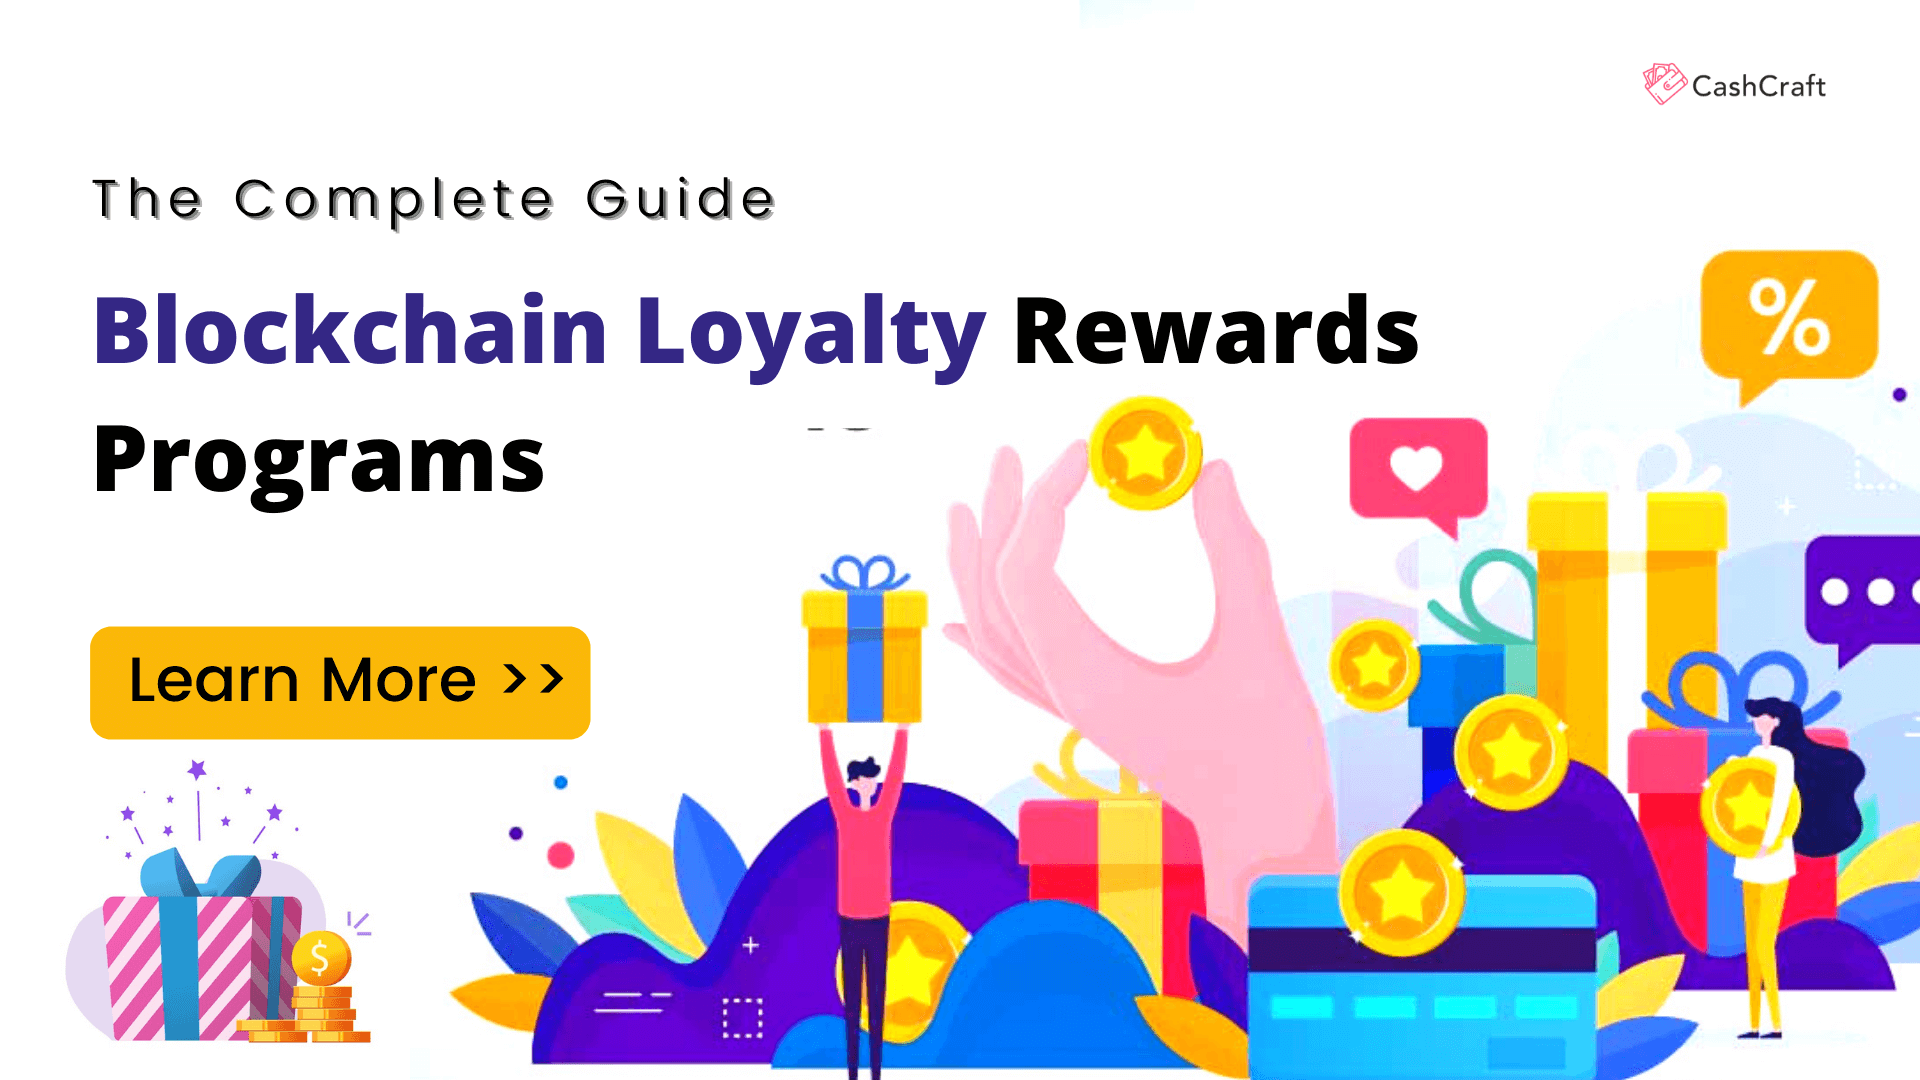 The Complete Guide To Blockchain Loyalty Rewards Programs